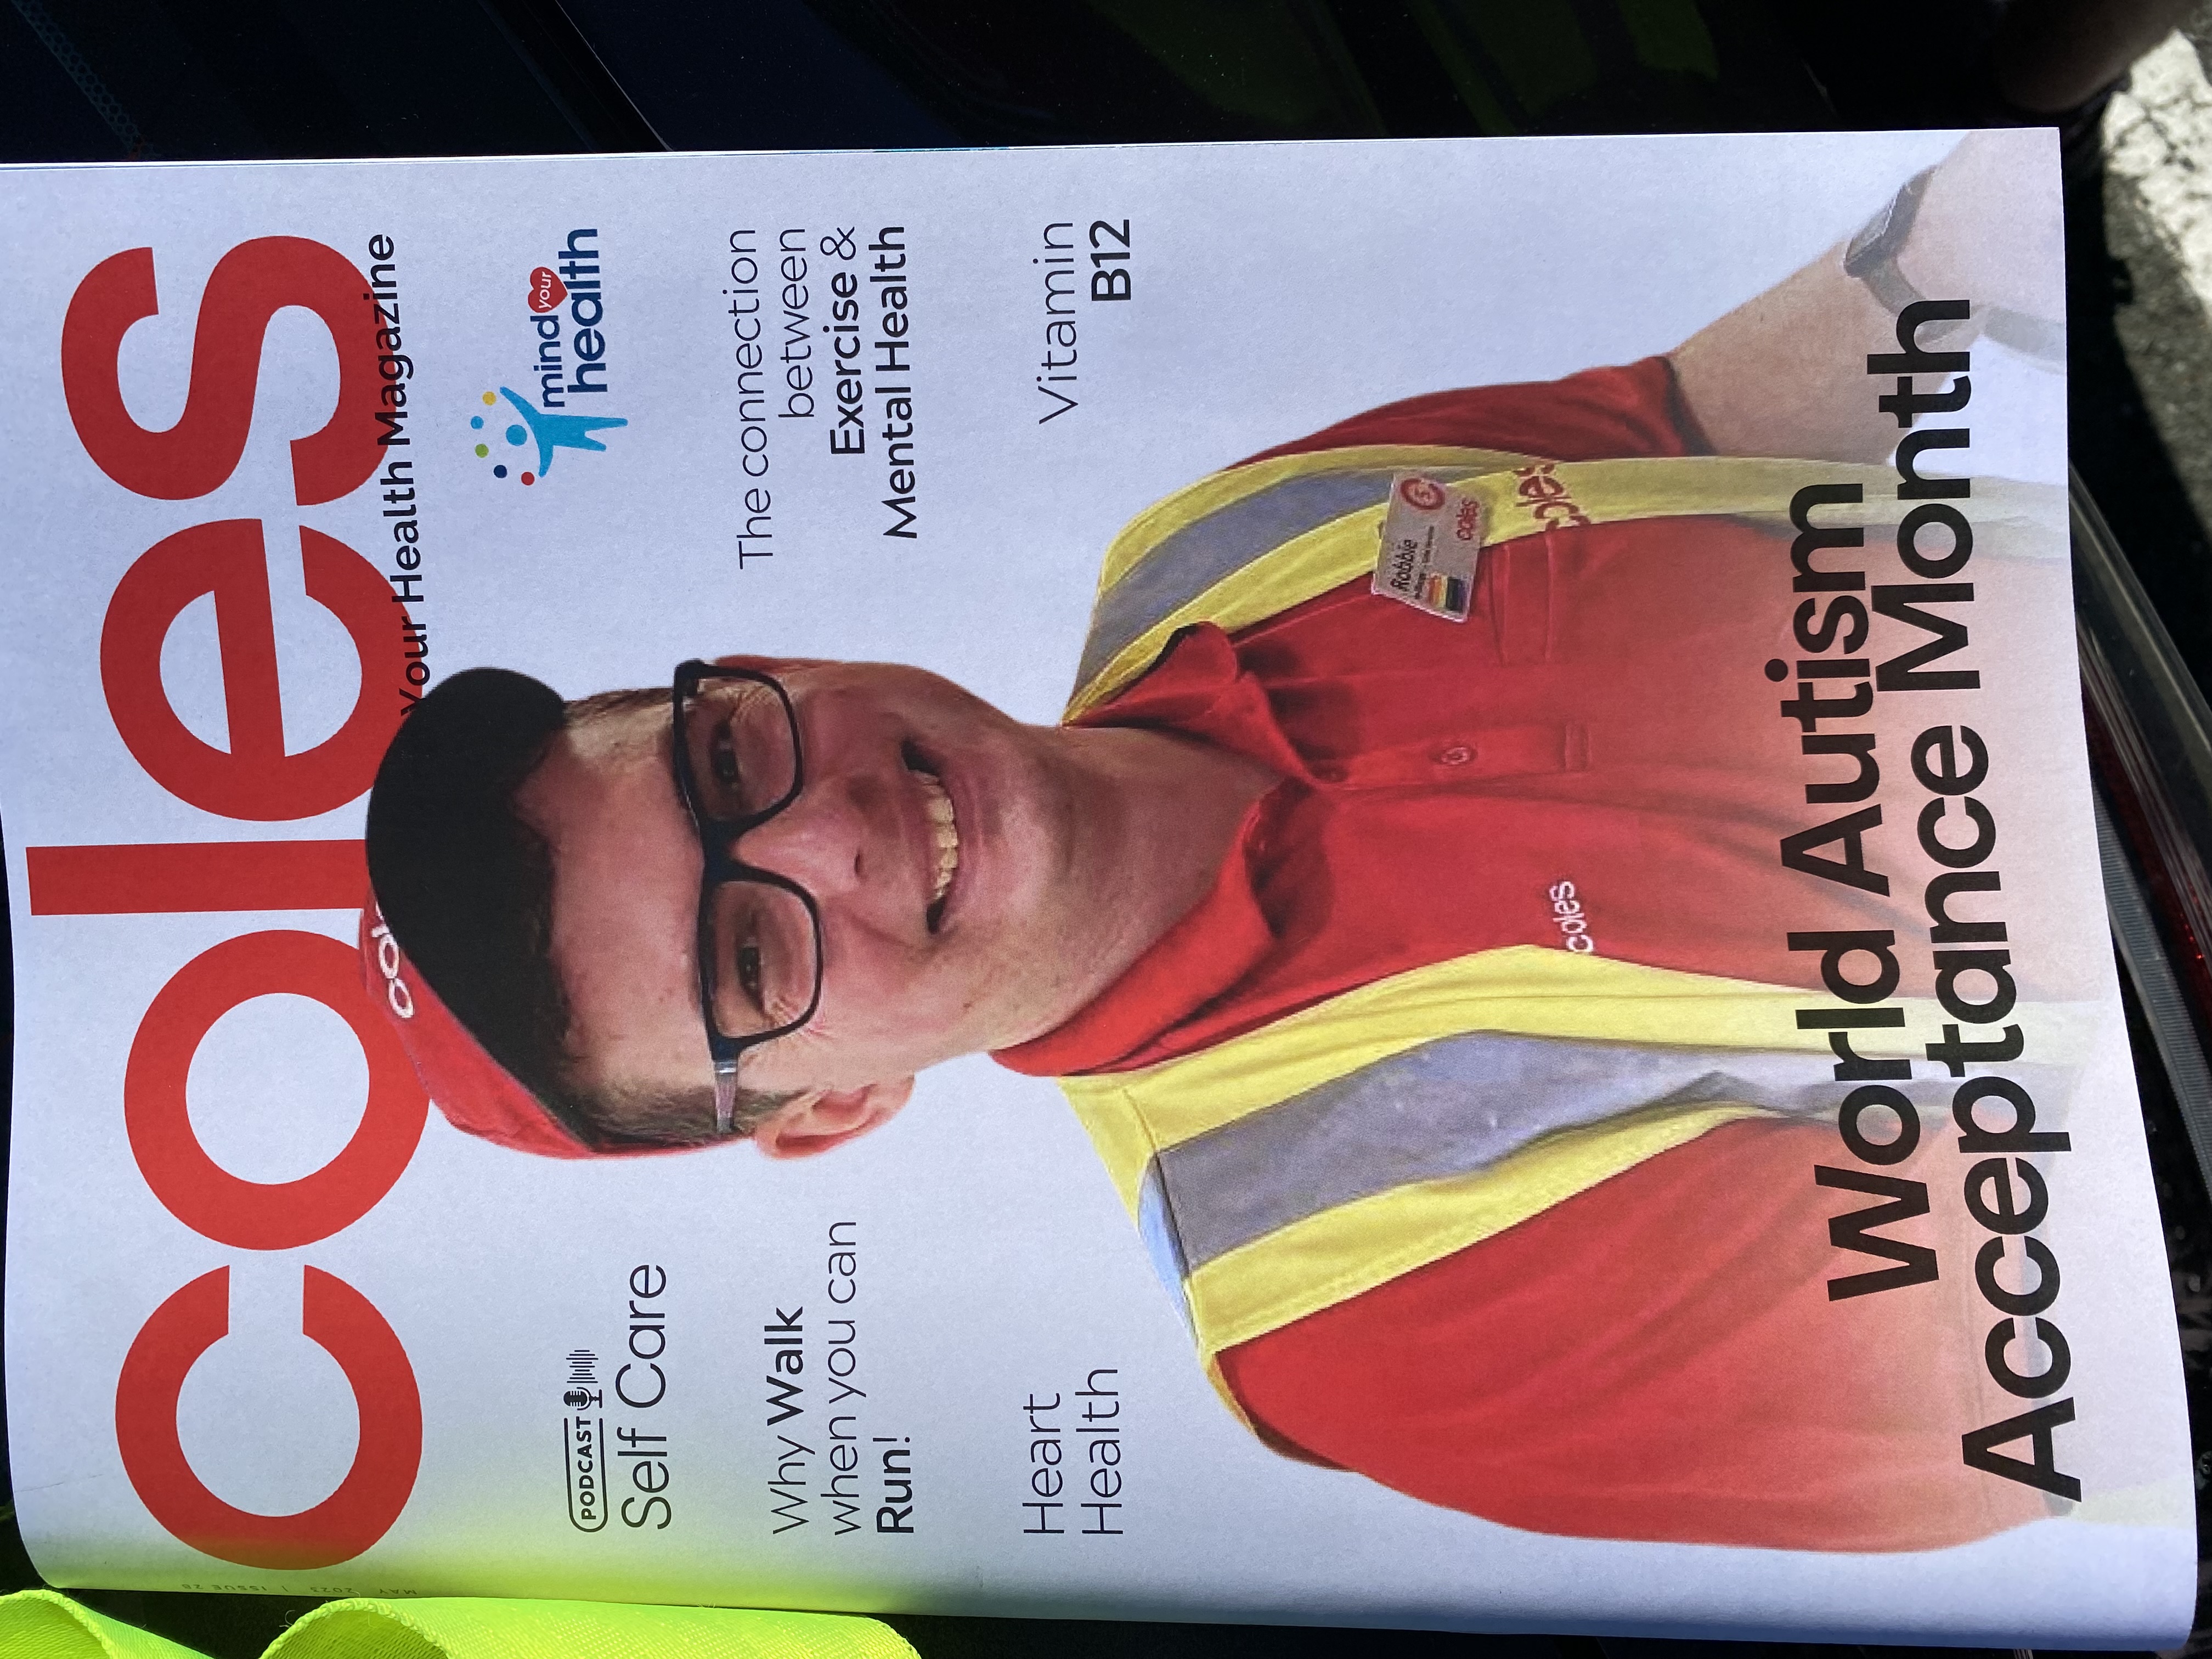 Coles Magazine with a photo of Robbie on the front